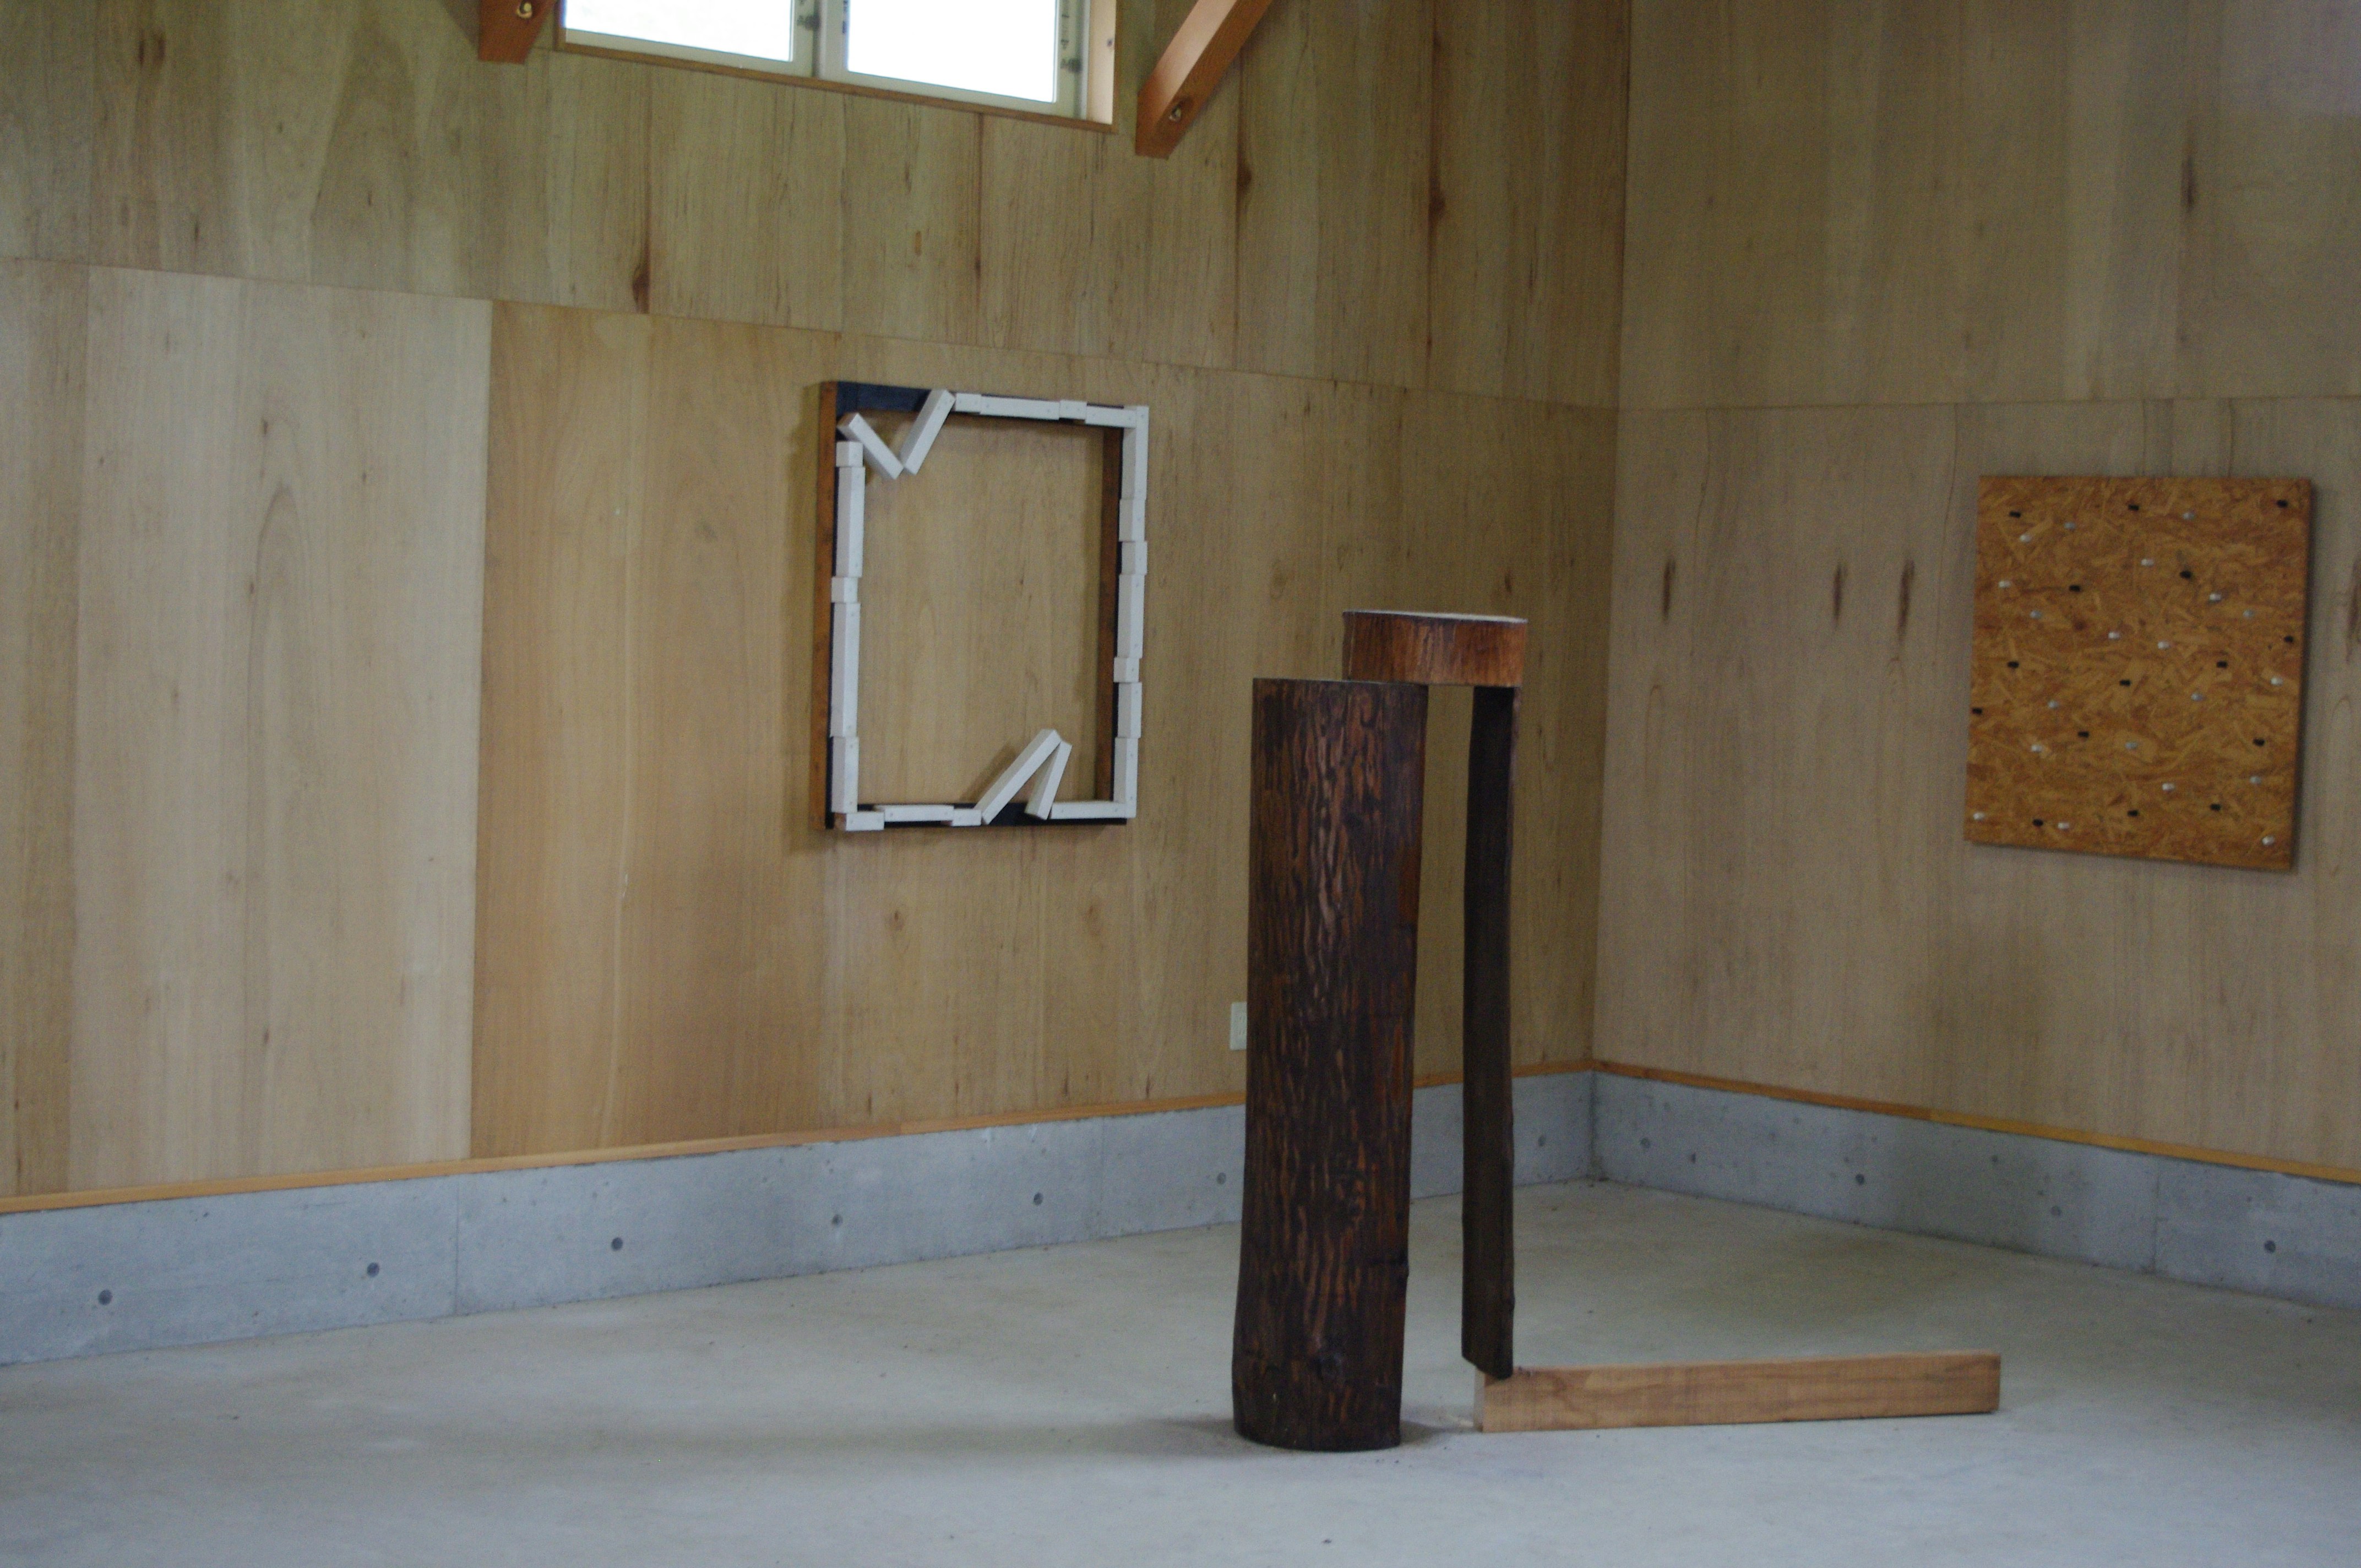 A dark timber structure built on the floor of a studio with frames mounted on the walls.